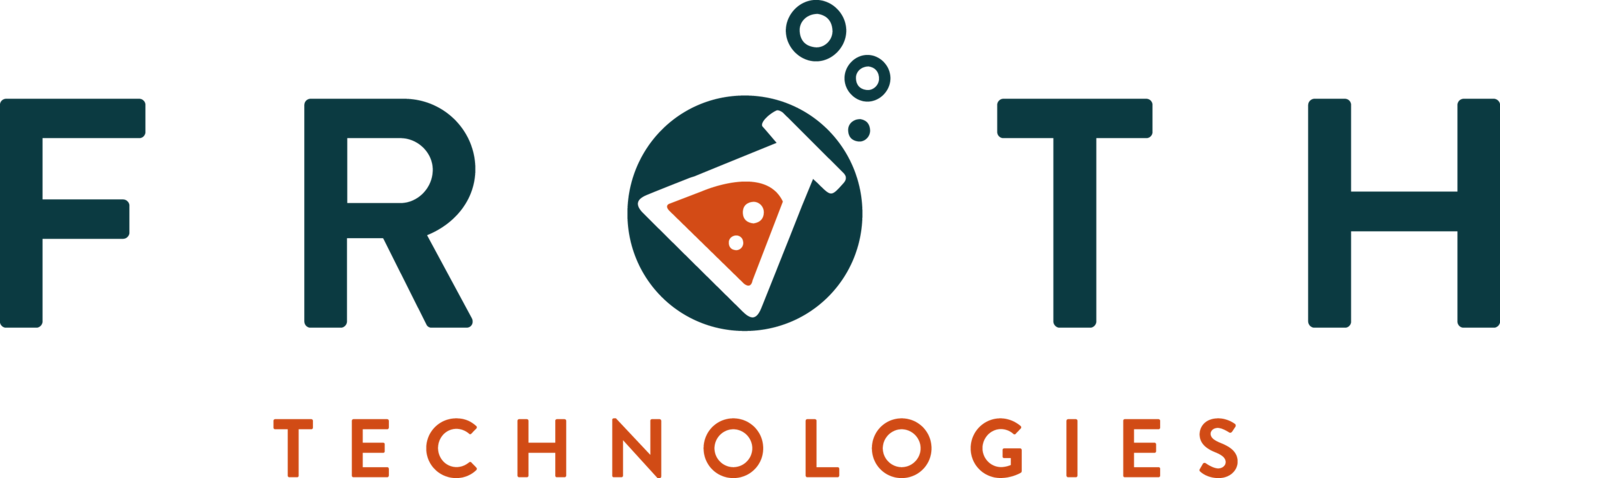 Froth Technologies